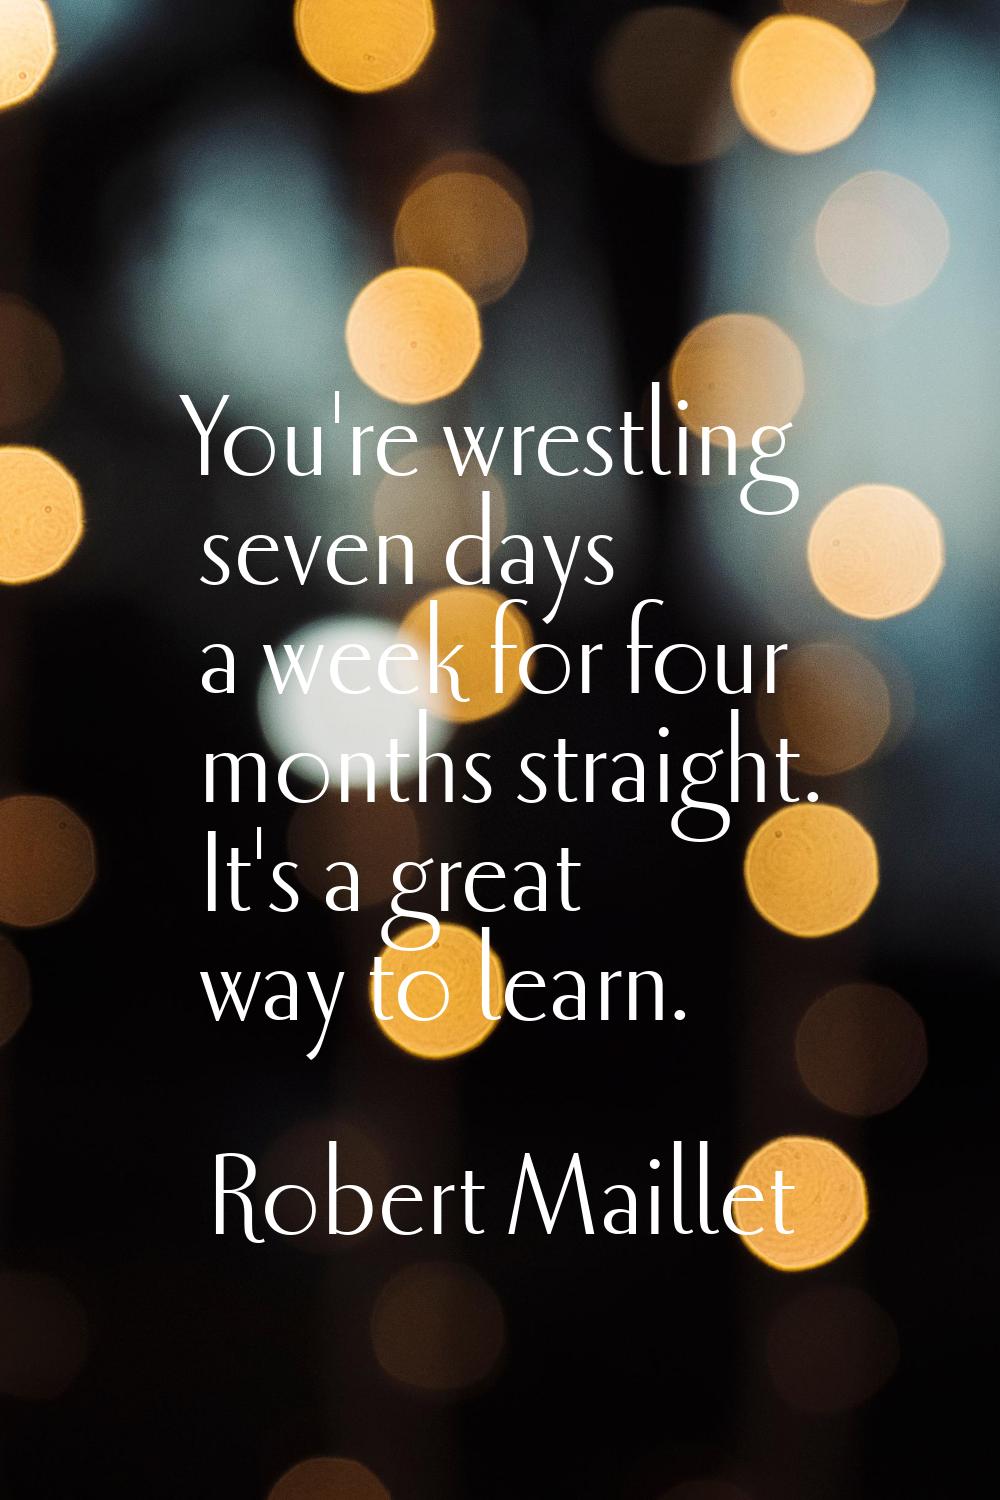 You're wrestling seven days a week for four months straight. It's a great way to learn.